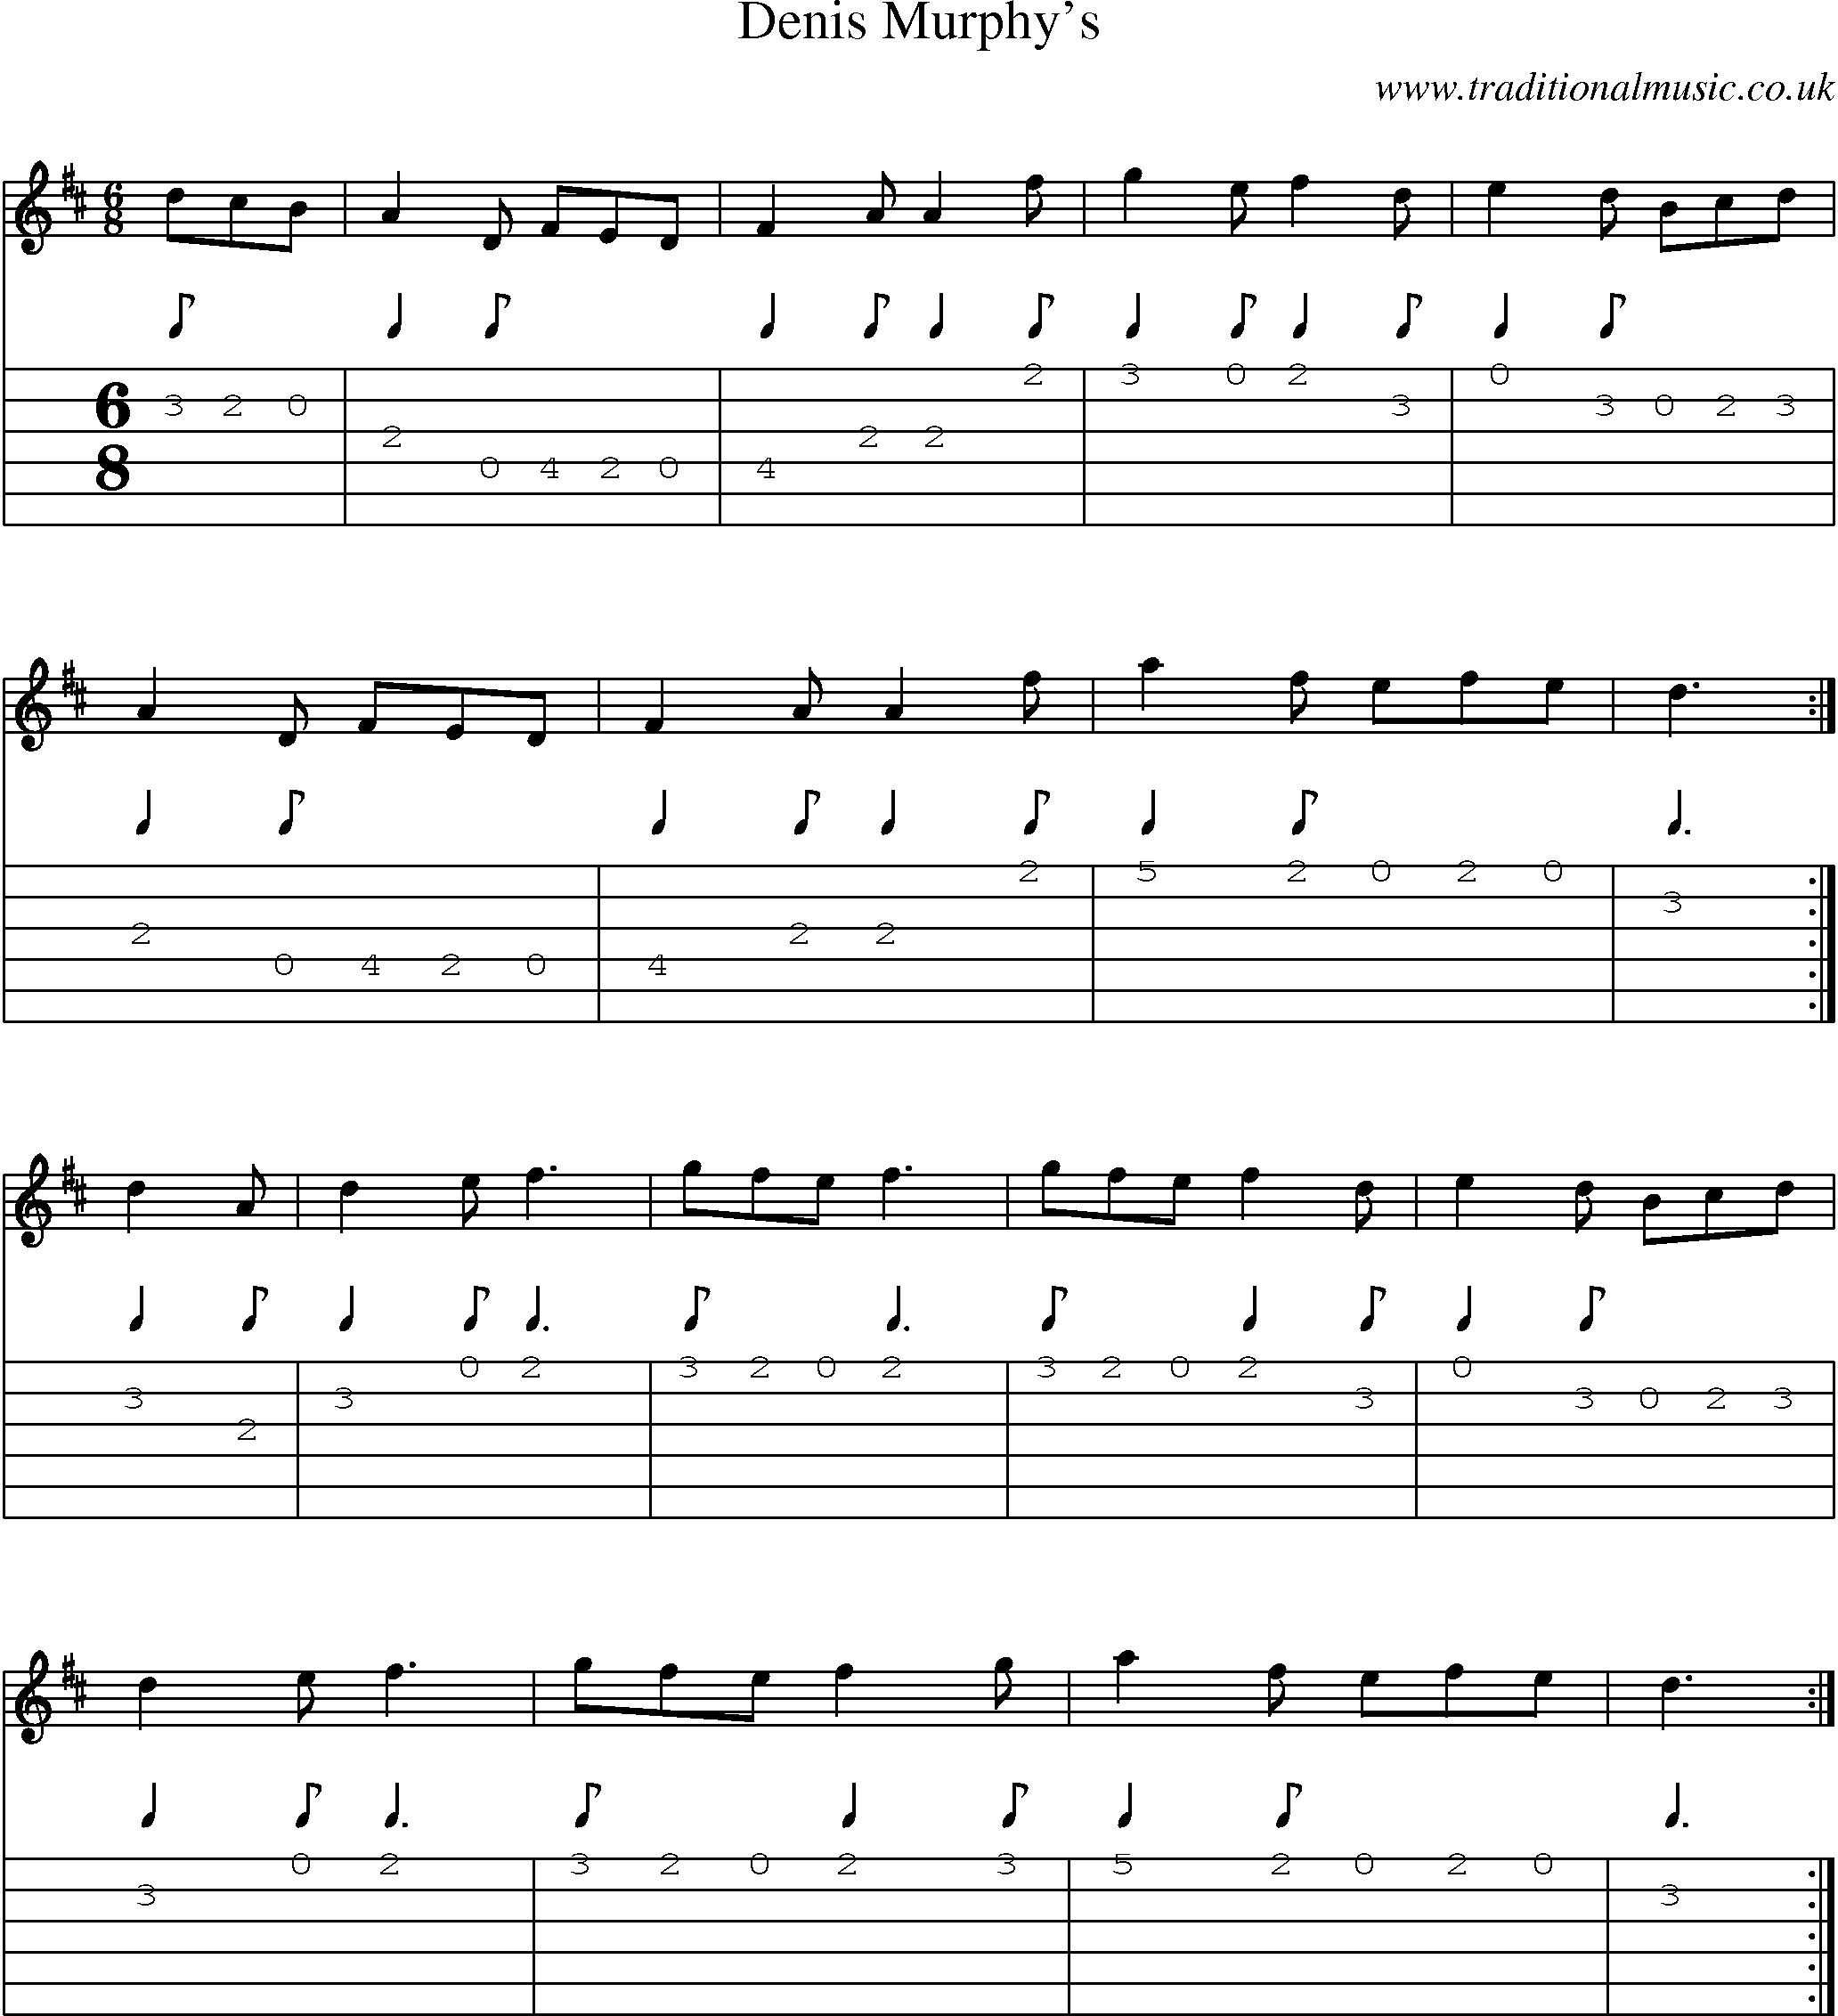 Music Score and Guitar Tabs for Denis Murphys